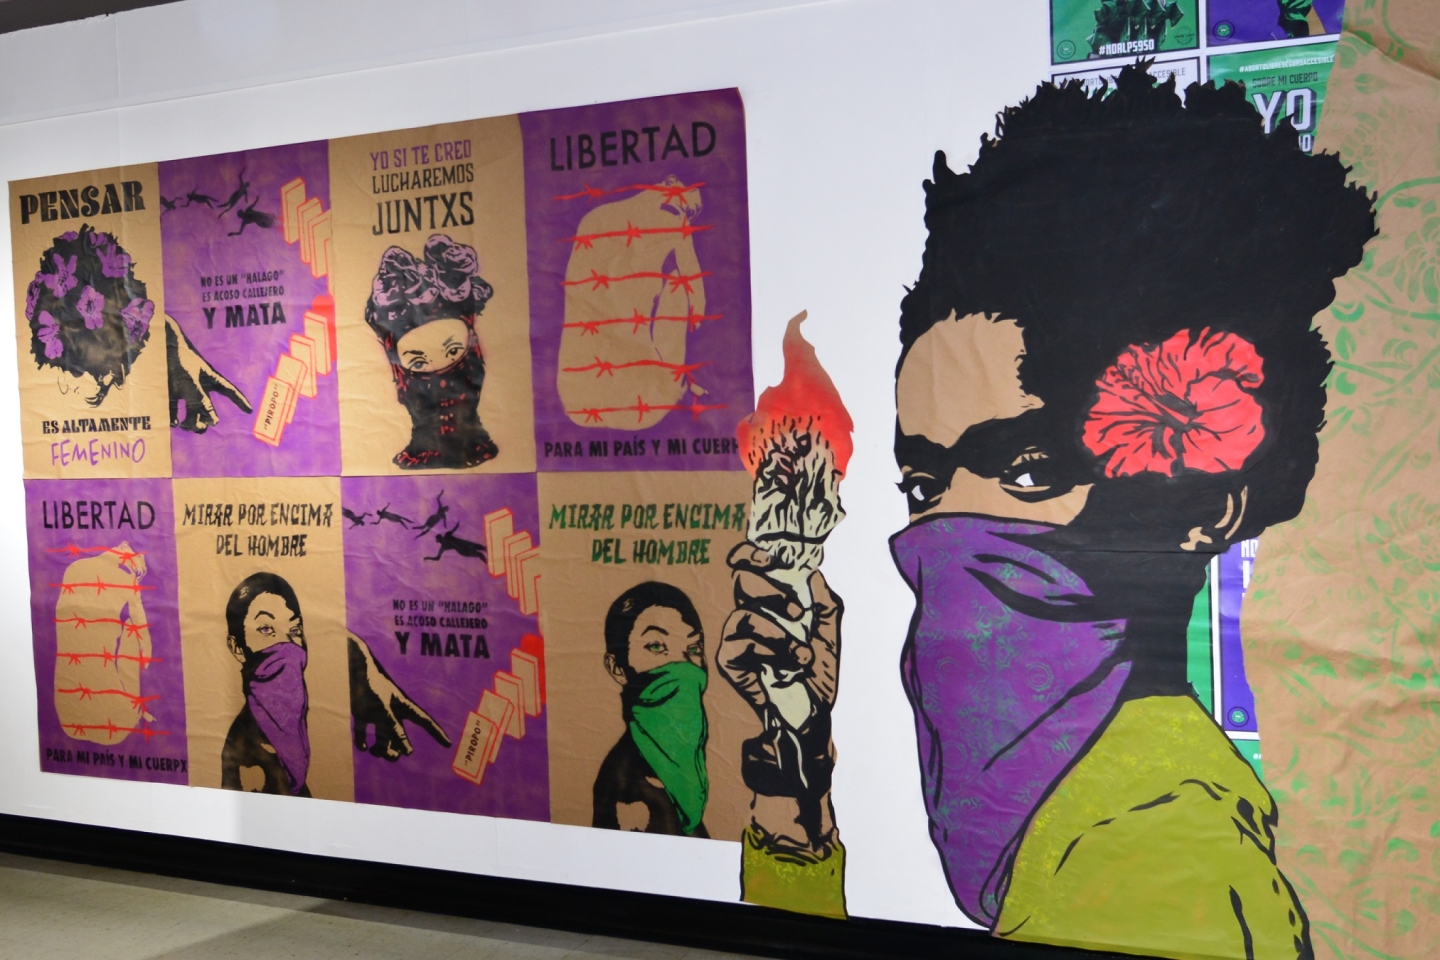 Political street art on display in an artists' space